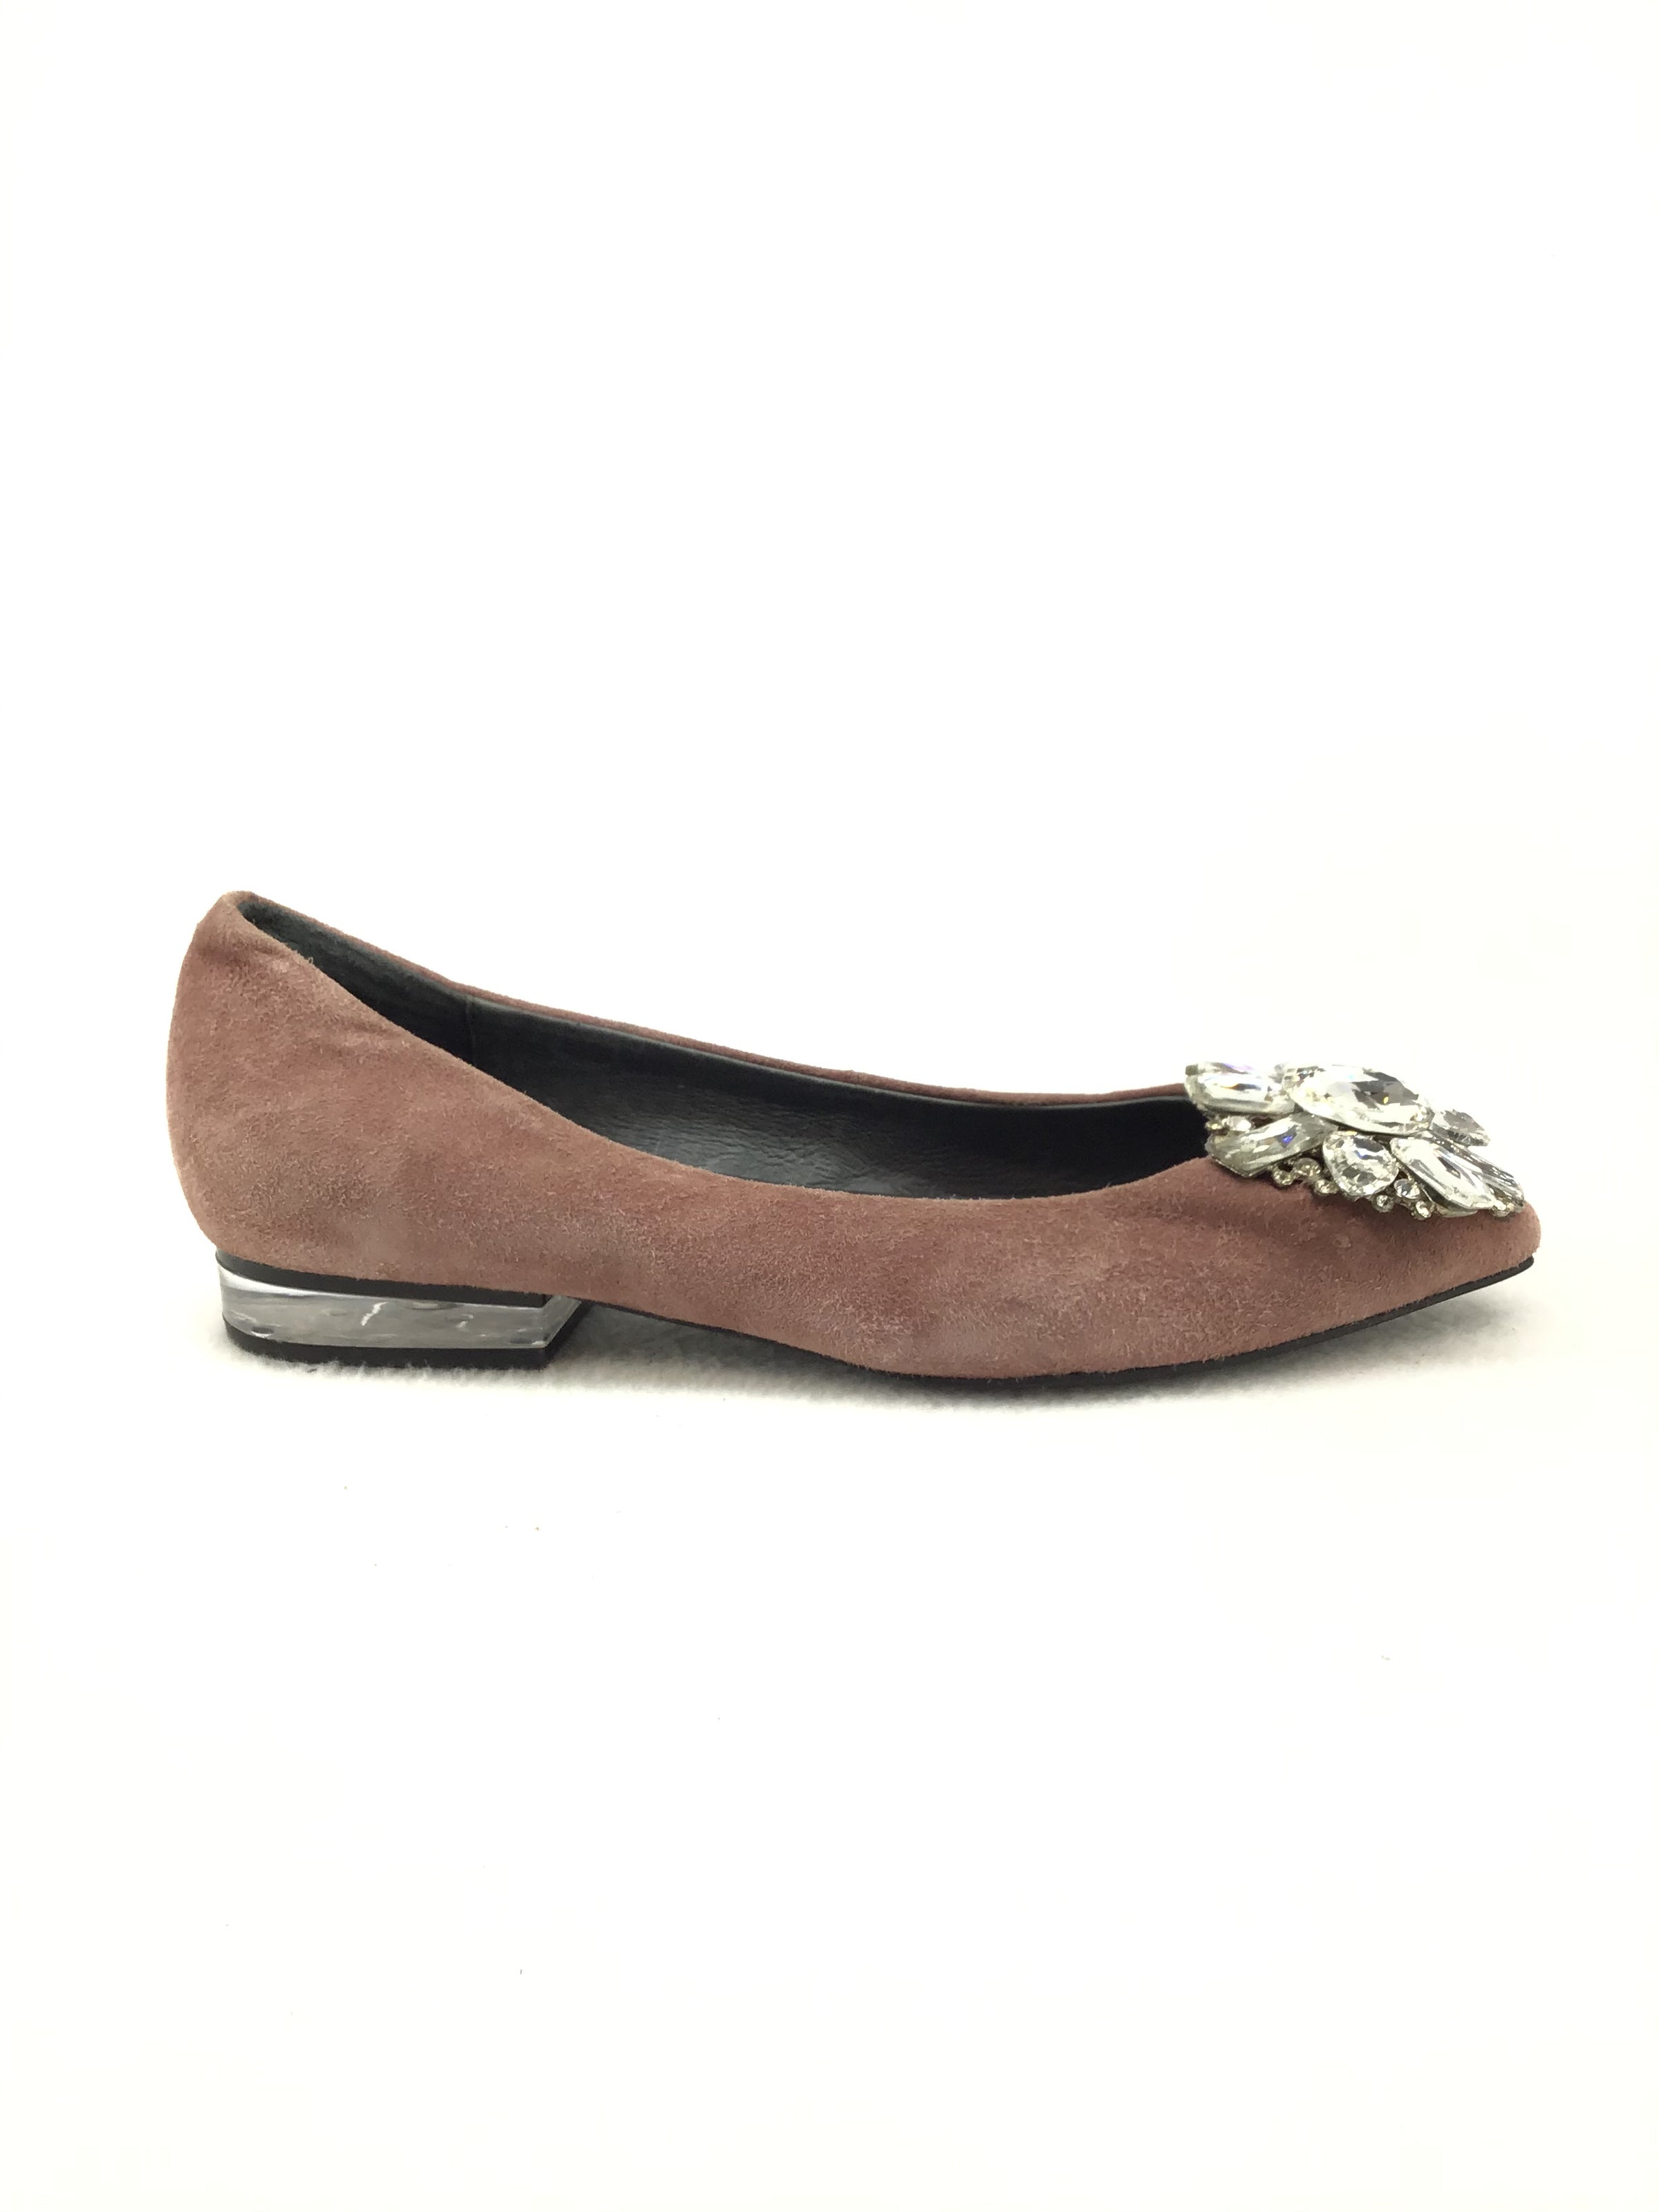 Jeffrey Campbell Pointed Toe Flats Size 5